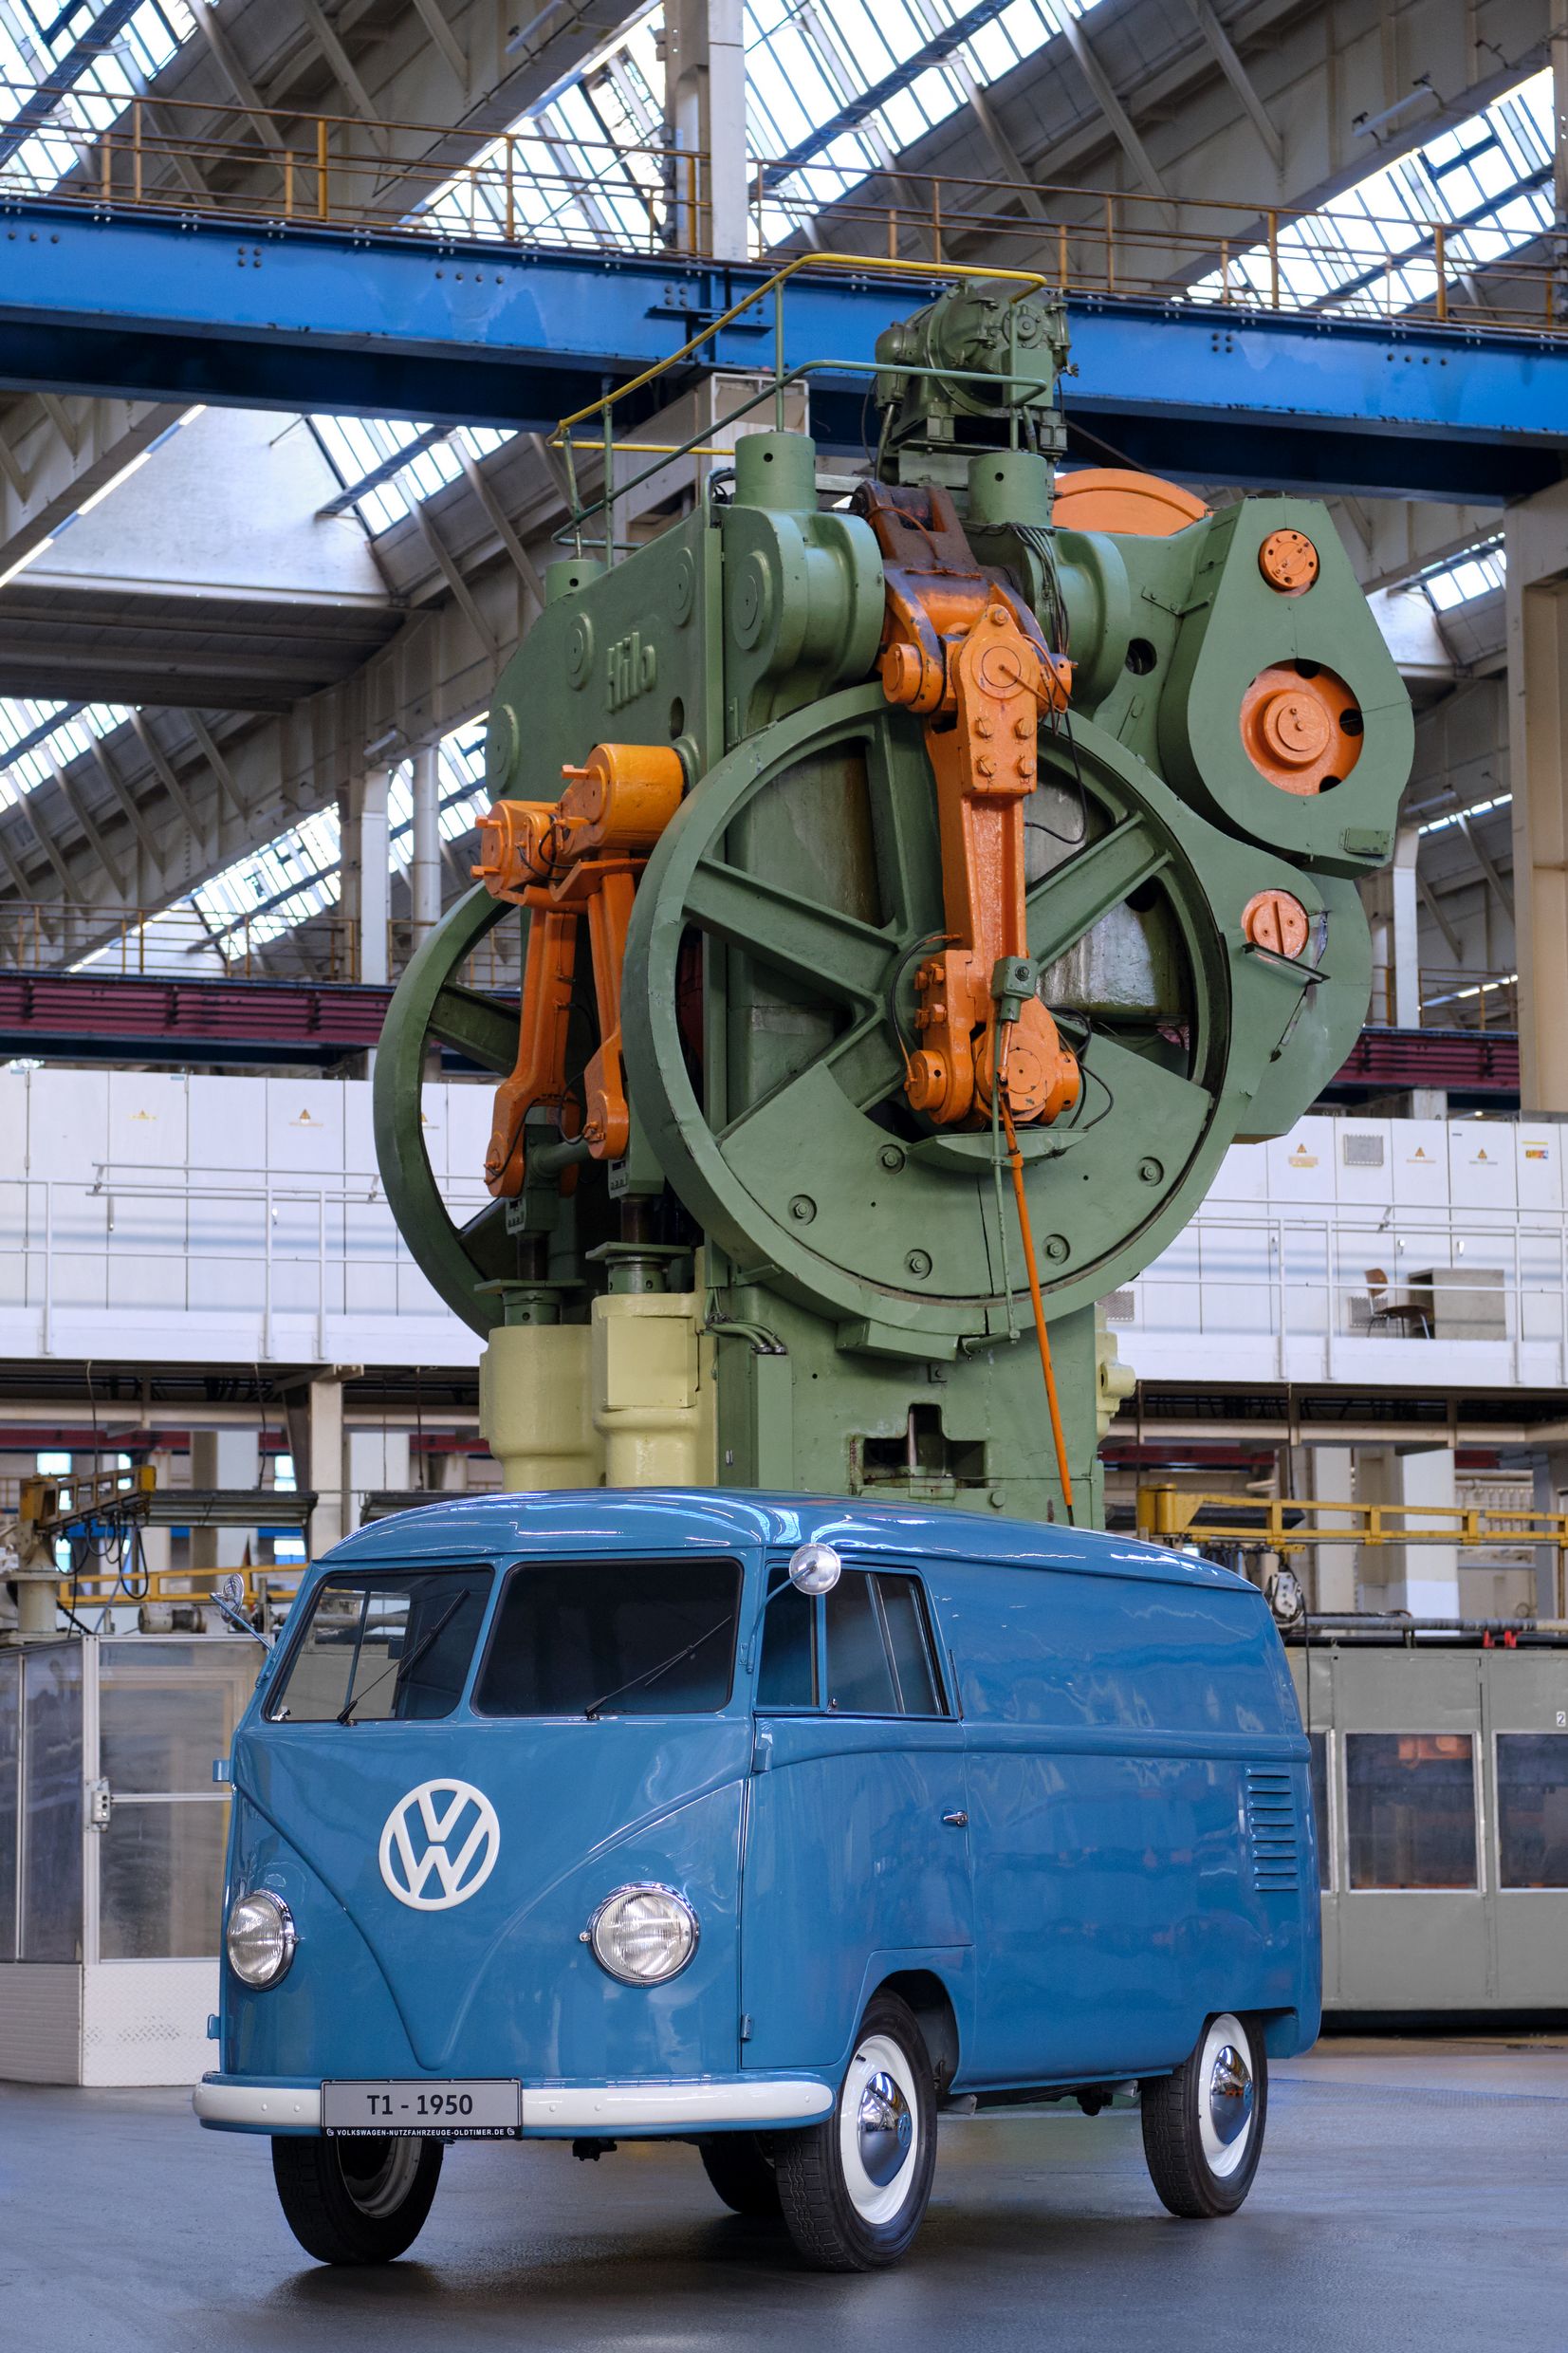 1950 VW T2 Oldest Full driver in industrial setting